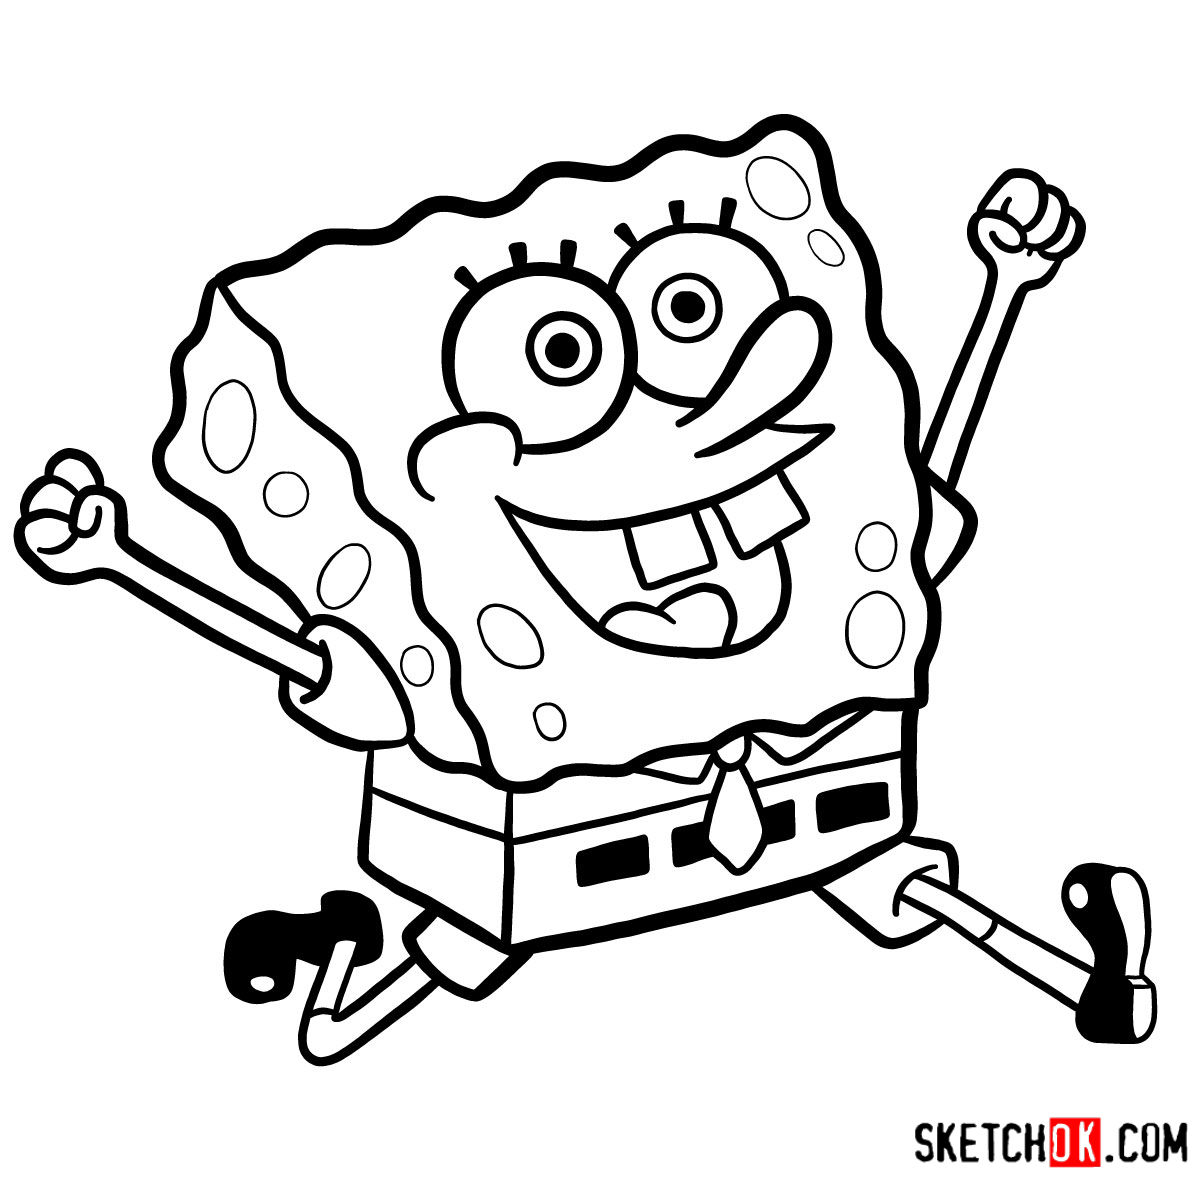 How to draw SpongeBob happy and running